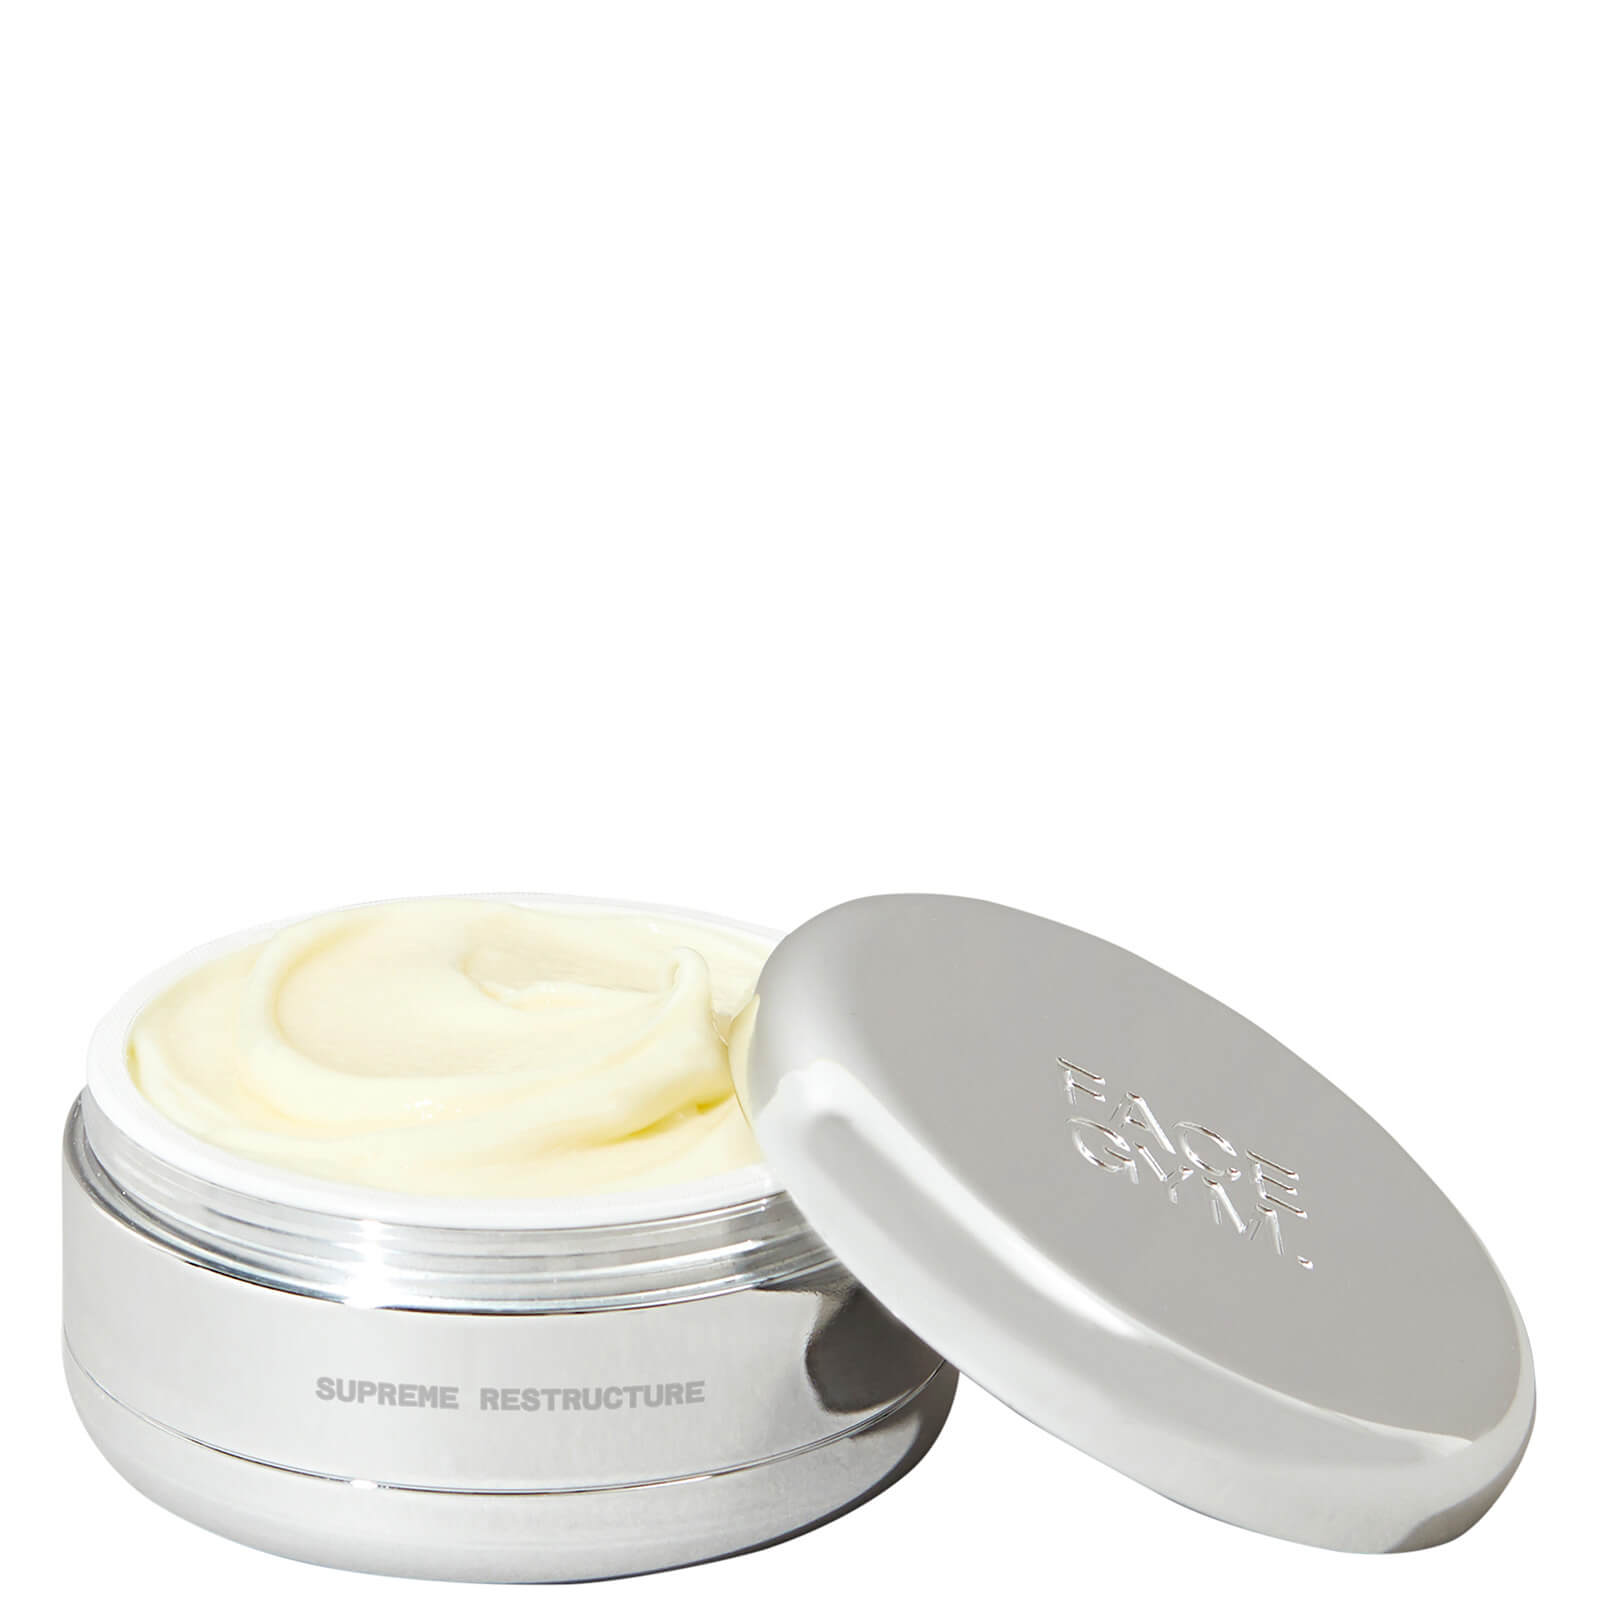 FaceGym Supreme Restructure Firming EGF Collagen Boosting Cream (Various Sizes) - 50ml Refill